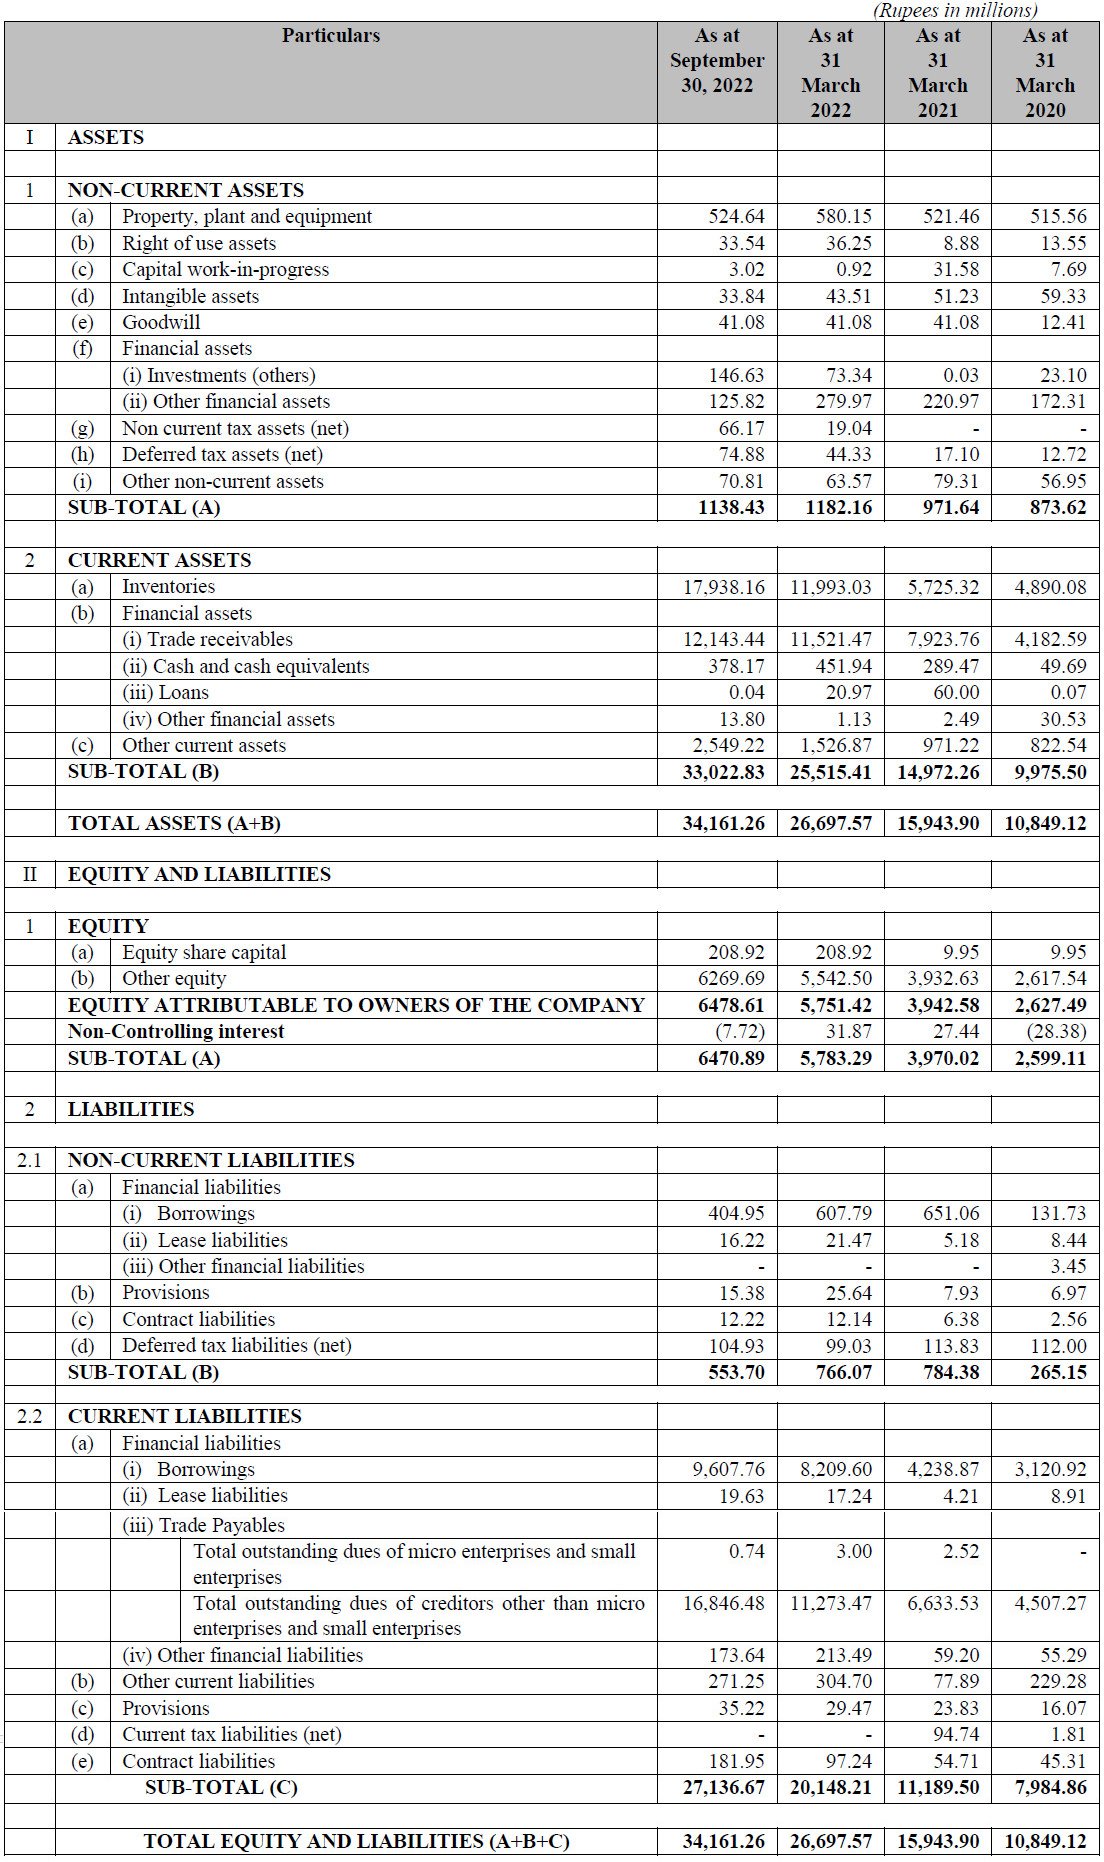 Rashi Peripherals IPO Statement of Assets and Liabilities